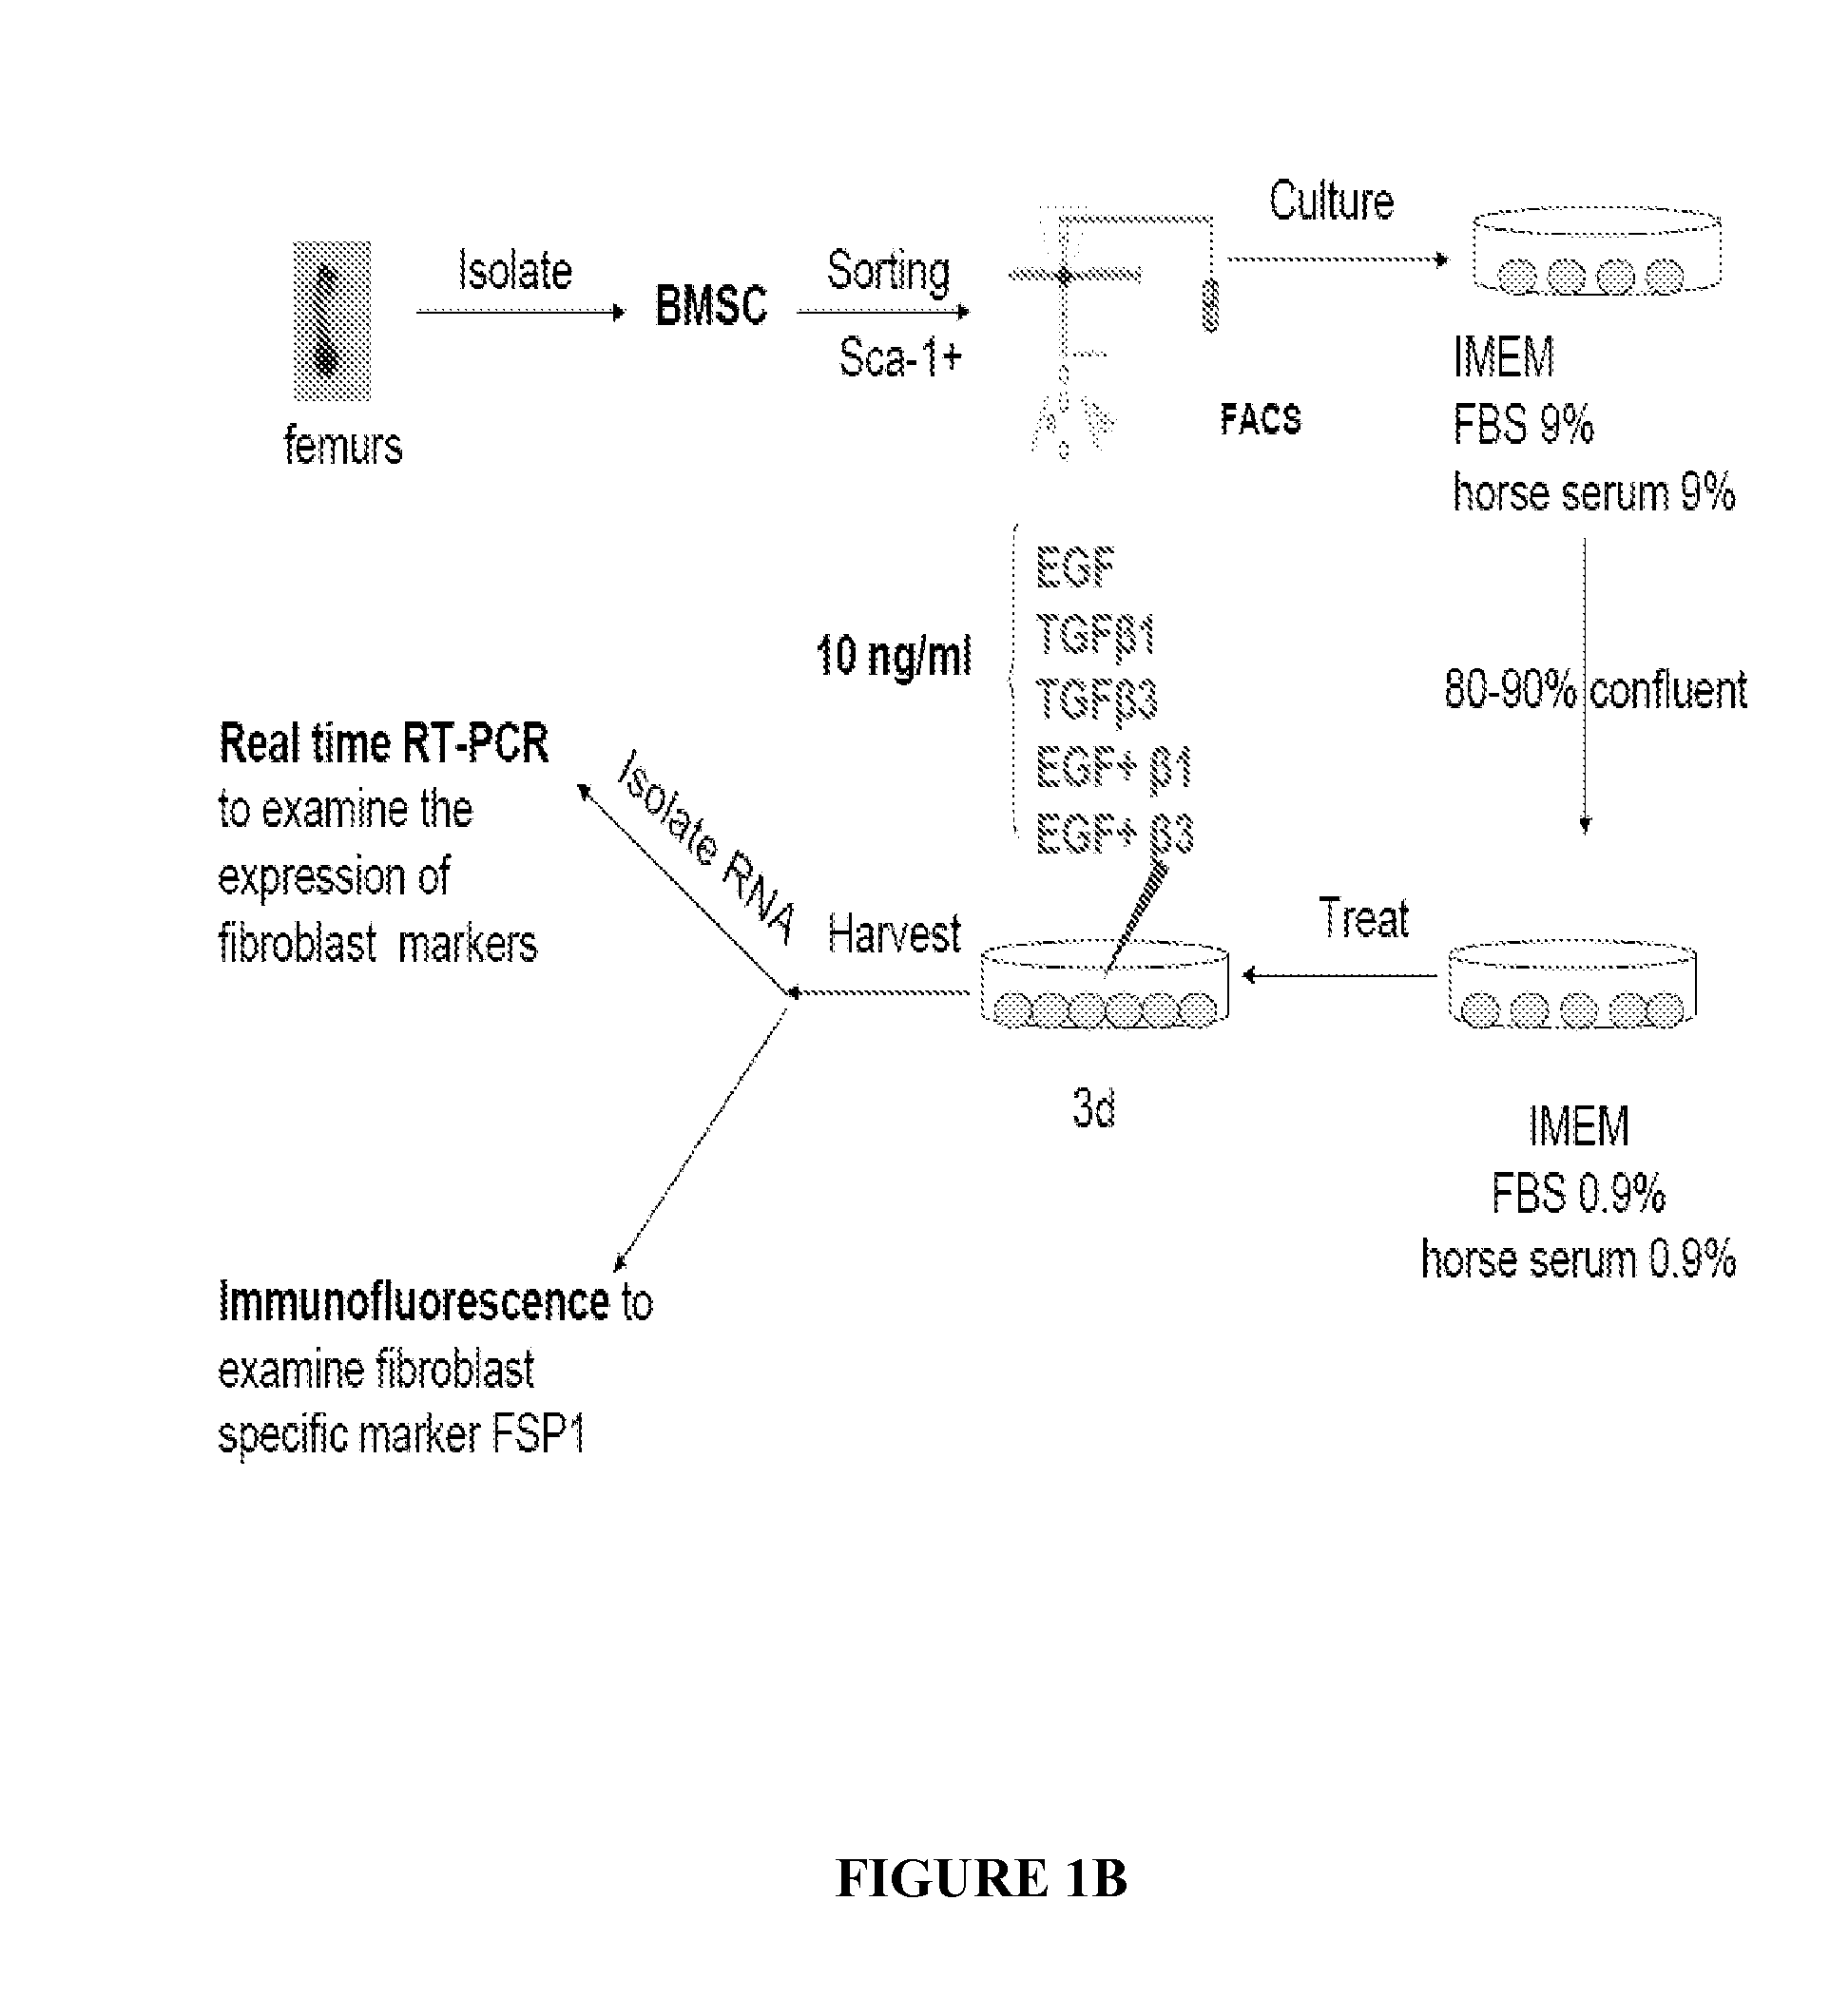 Differentiation of mesenchymal stem cells into fibroblasts, compositions comprising mesenchymal stem cell-derived fibroblasts, and methods of using the same